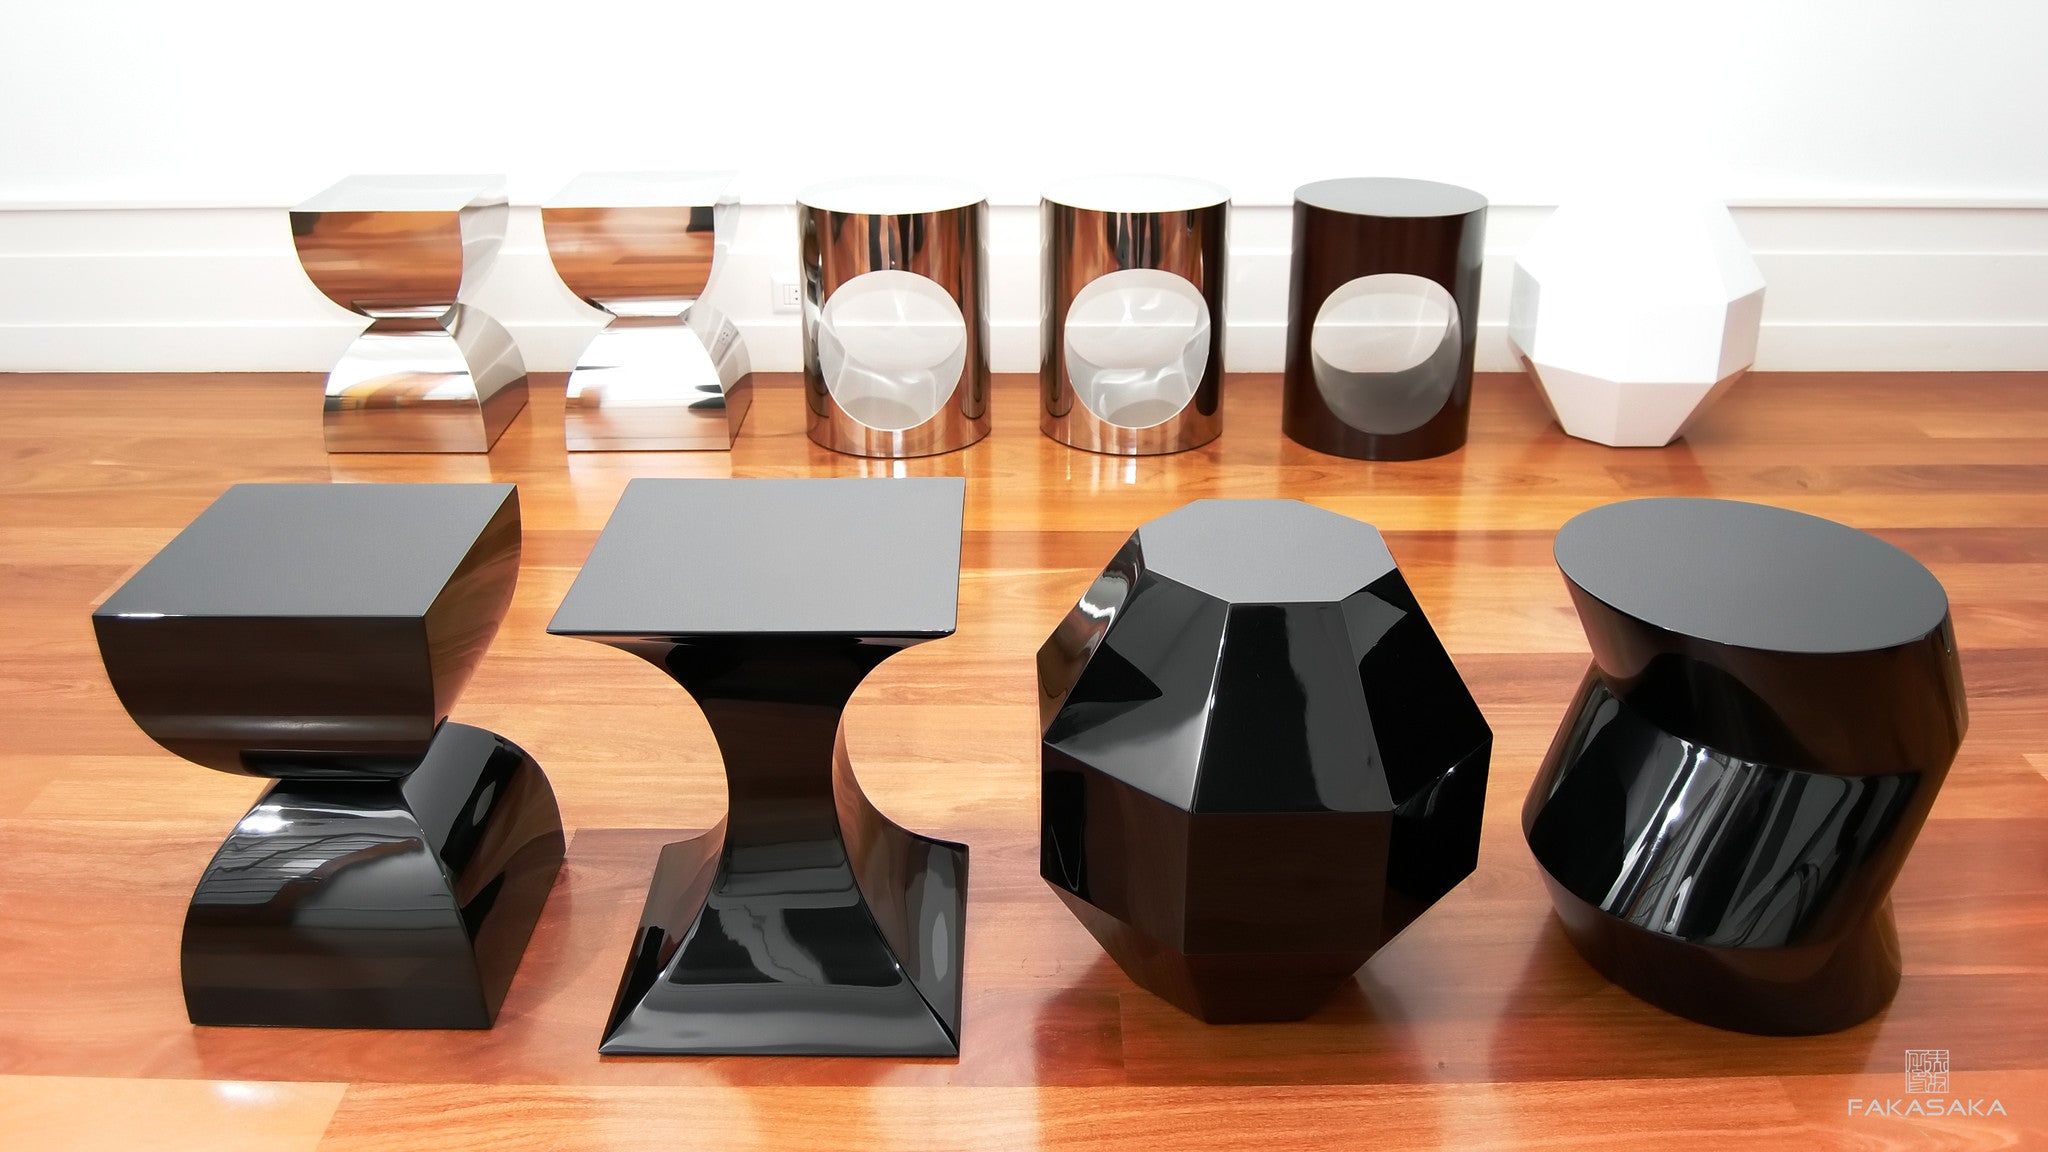 FA4<br><br>STOOL / SIDE TABLE / DRINK TABLE<br><br>LACQUER BLACK